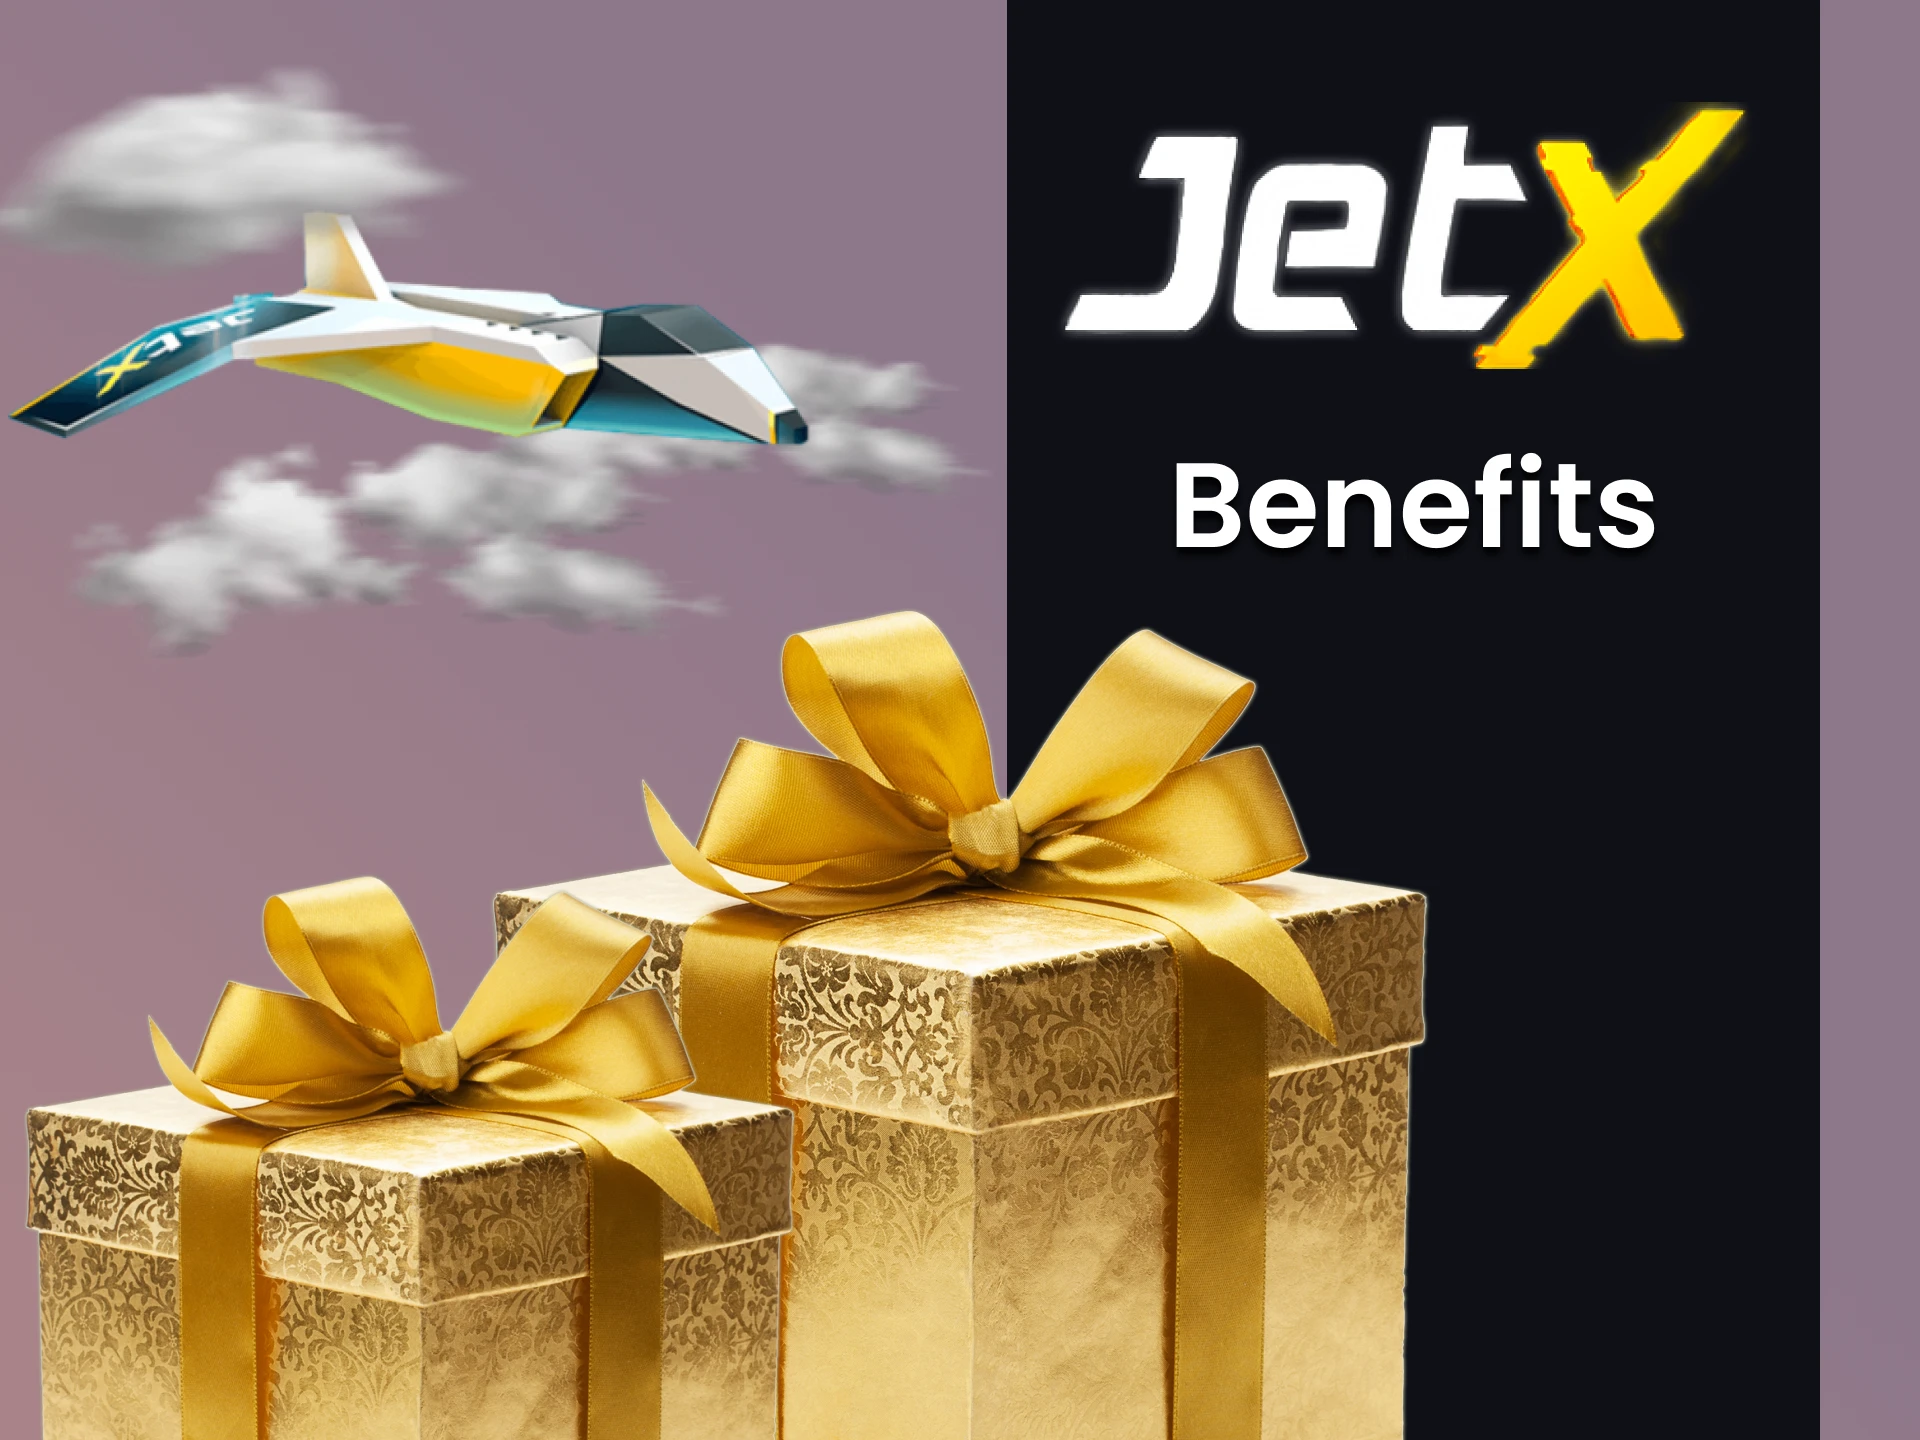 You will find many benefits in the demo version of JetX.